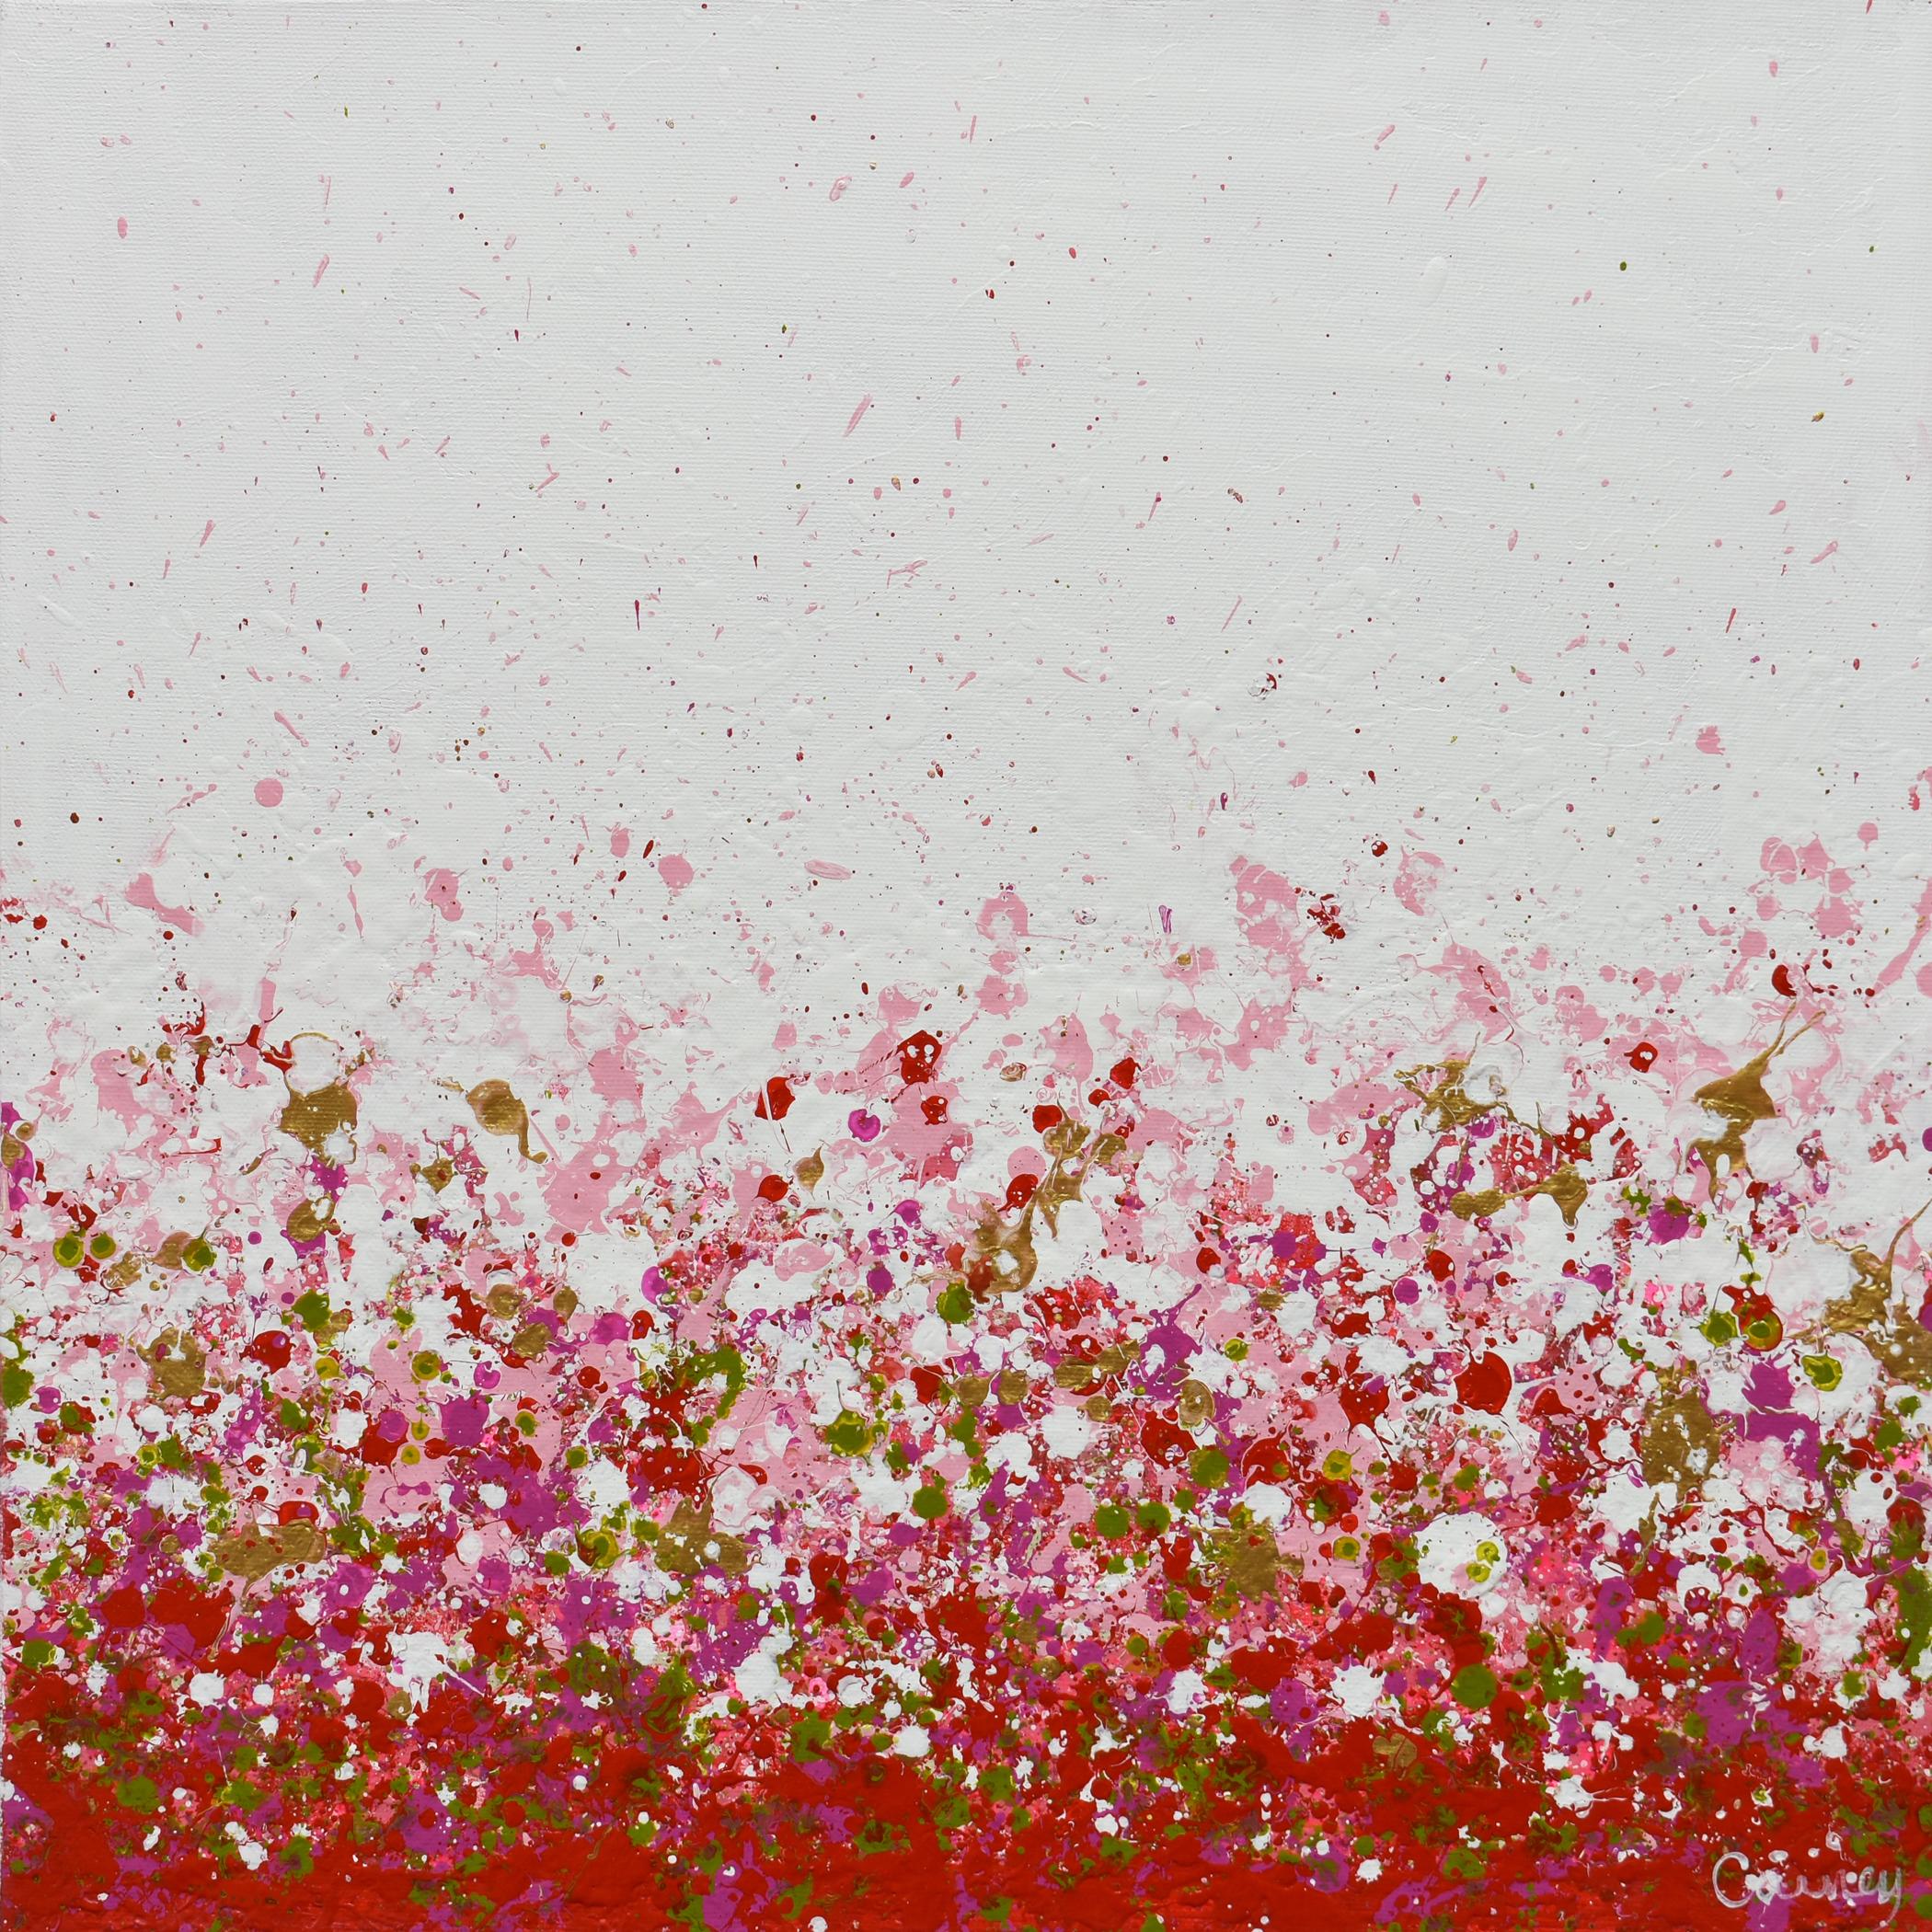 <p>Artist Comments<br />A bright palette of red, pink purple and green splash across the canvas in suggestion of spring flowers. Part of Lisa Carney's signature GeoFlora series, a collection of abstracted botanical paintings where she uses drip and